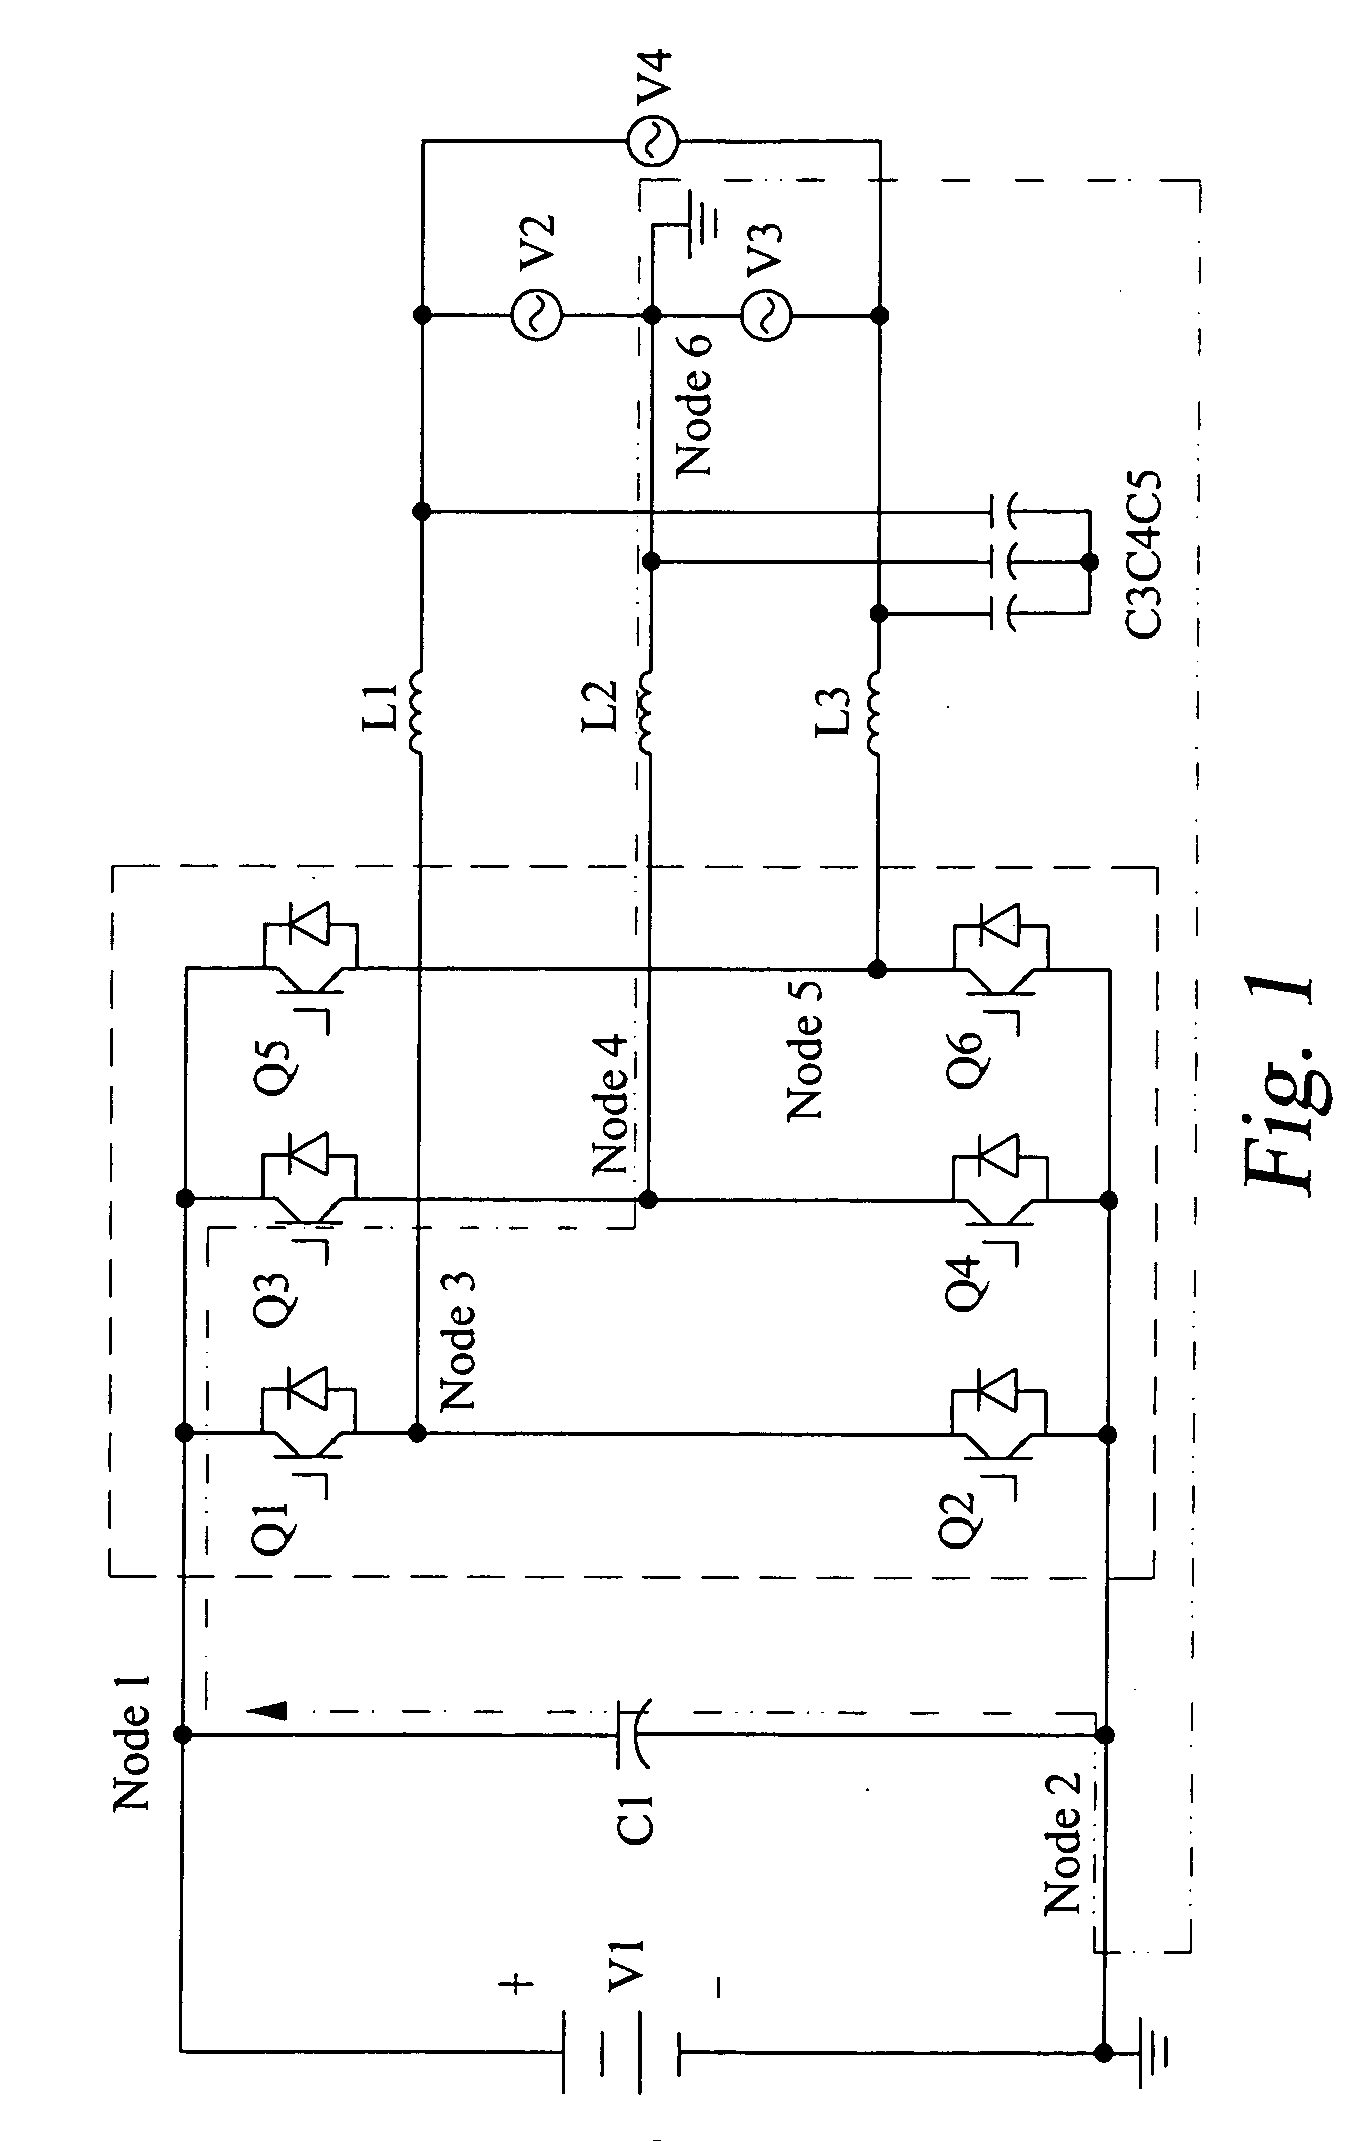 Transformerless power conversion circuit for grid-connected power generation systems